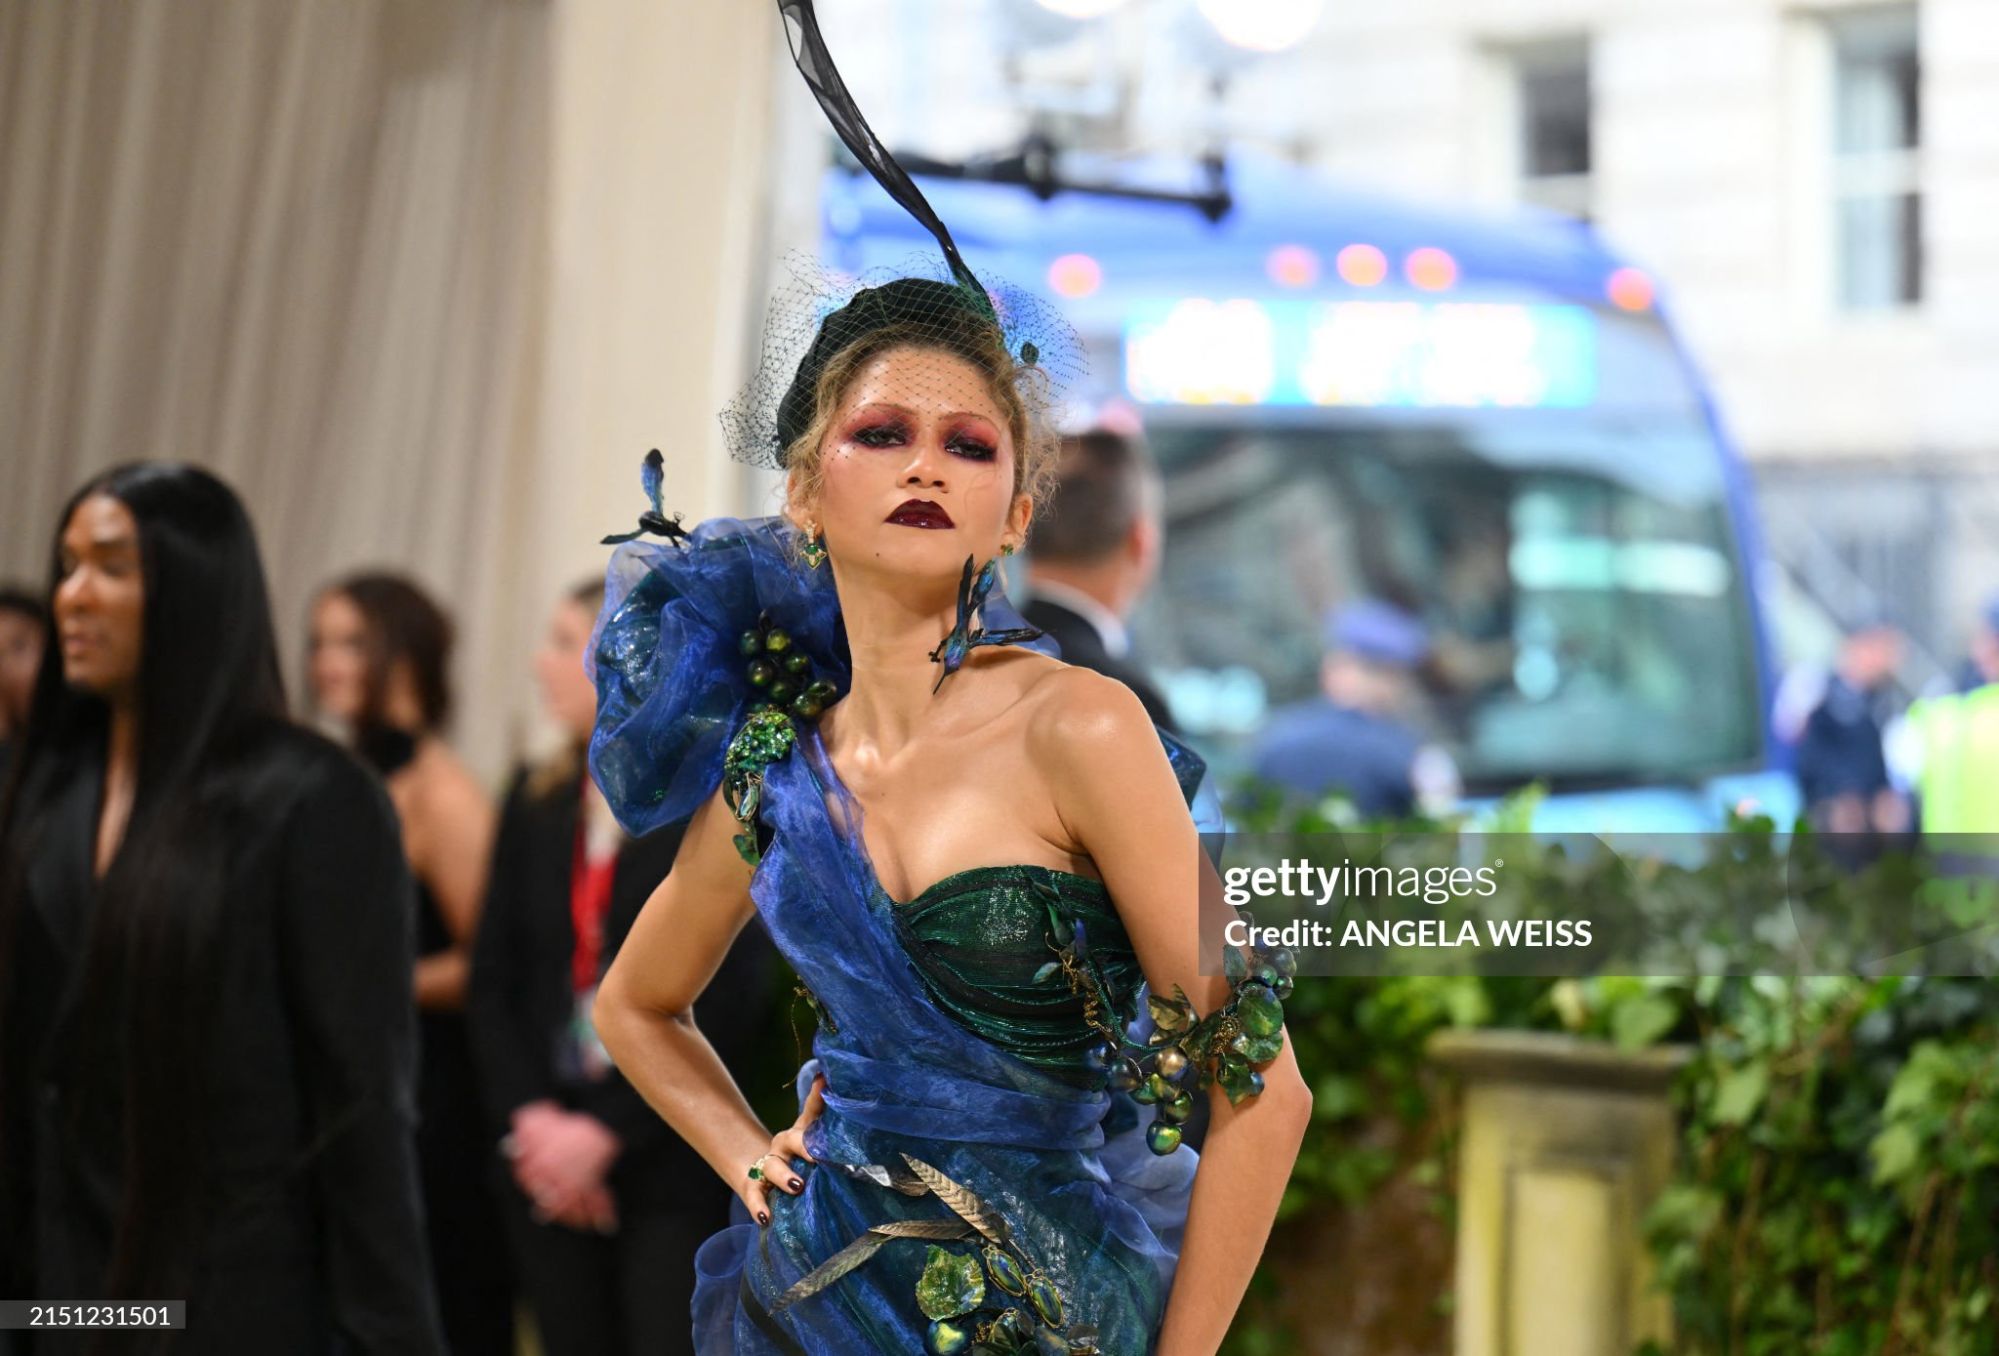 gettyimages-2151231501-2048x2048.jpg